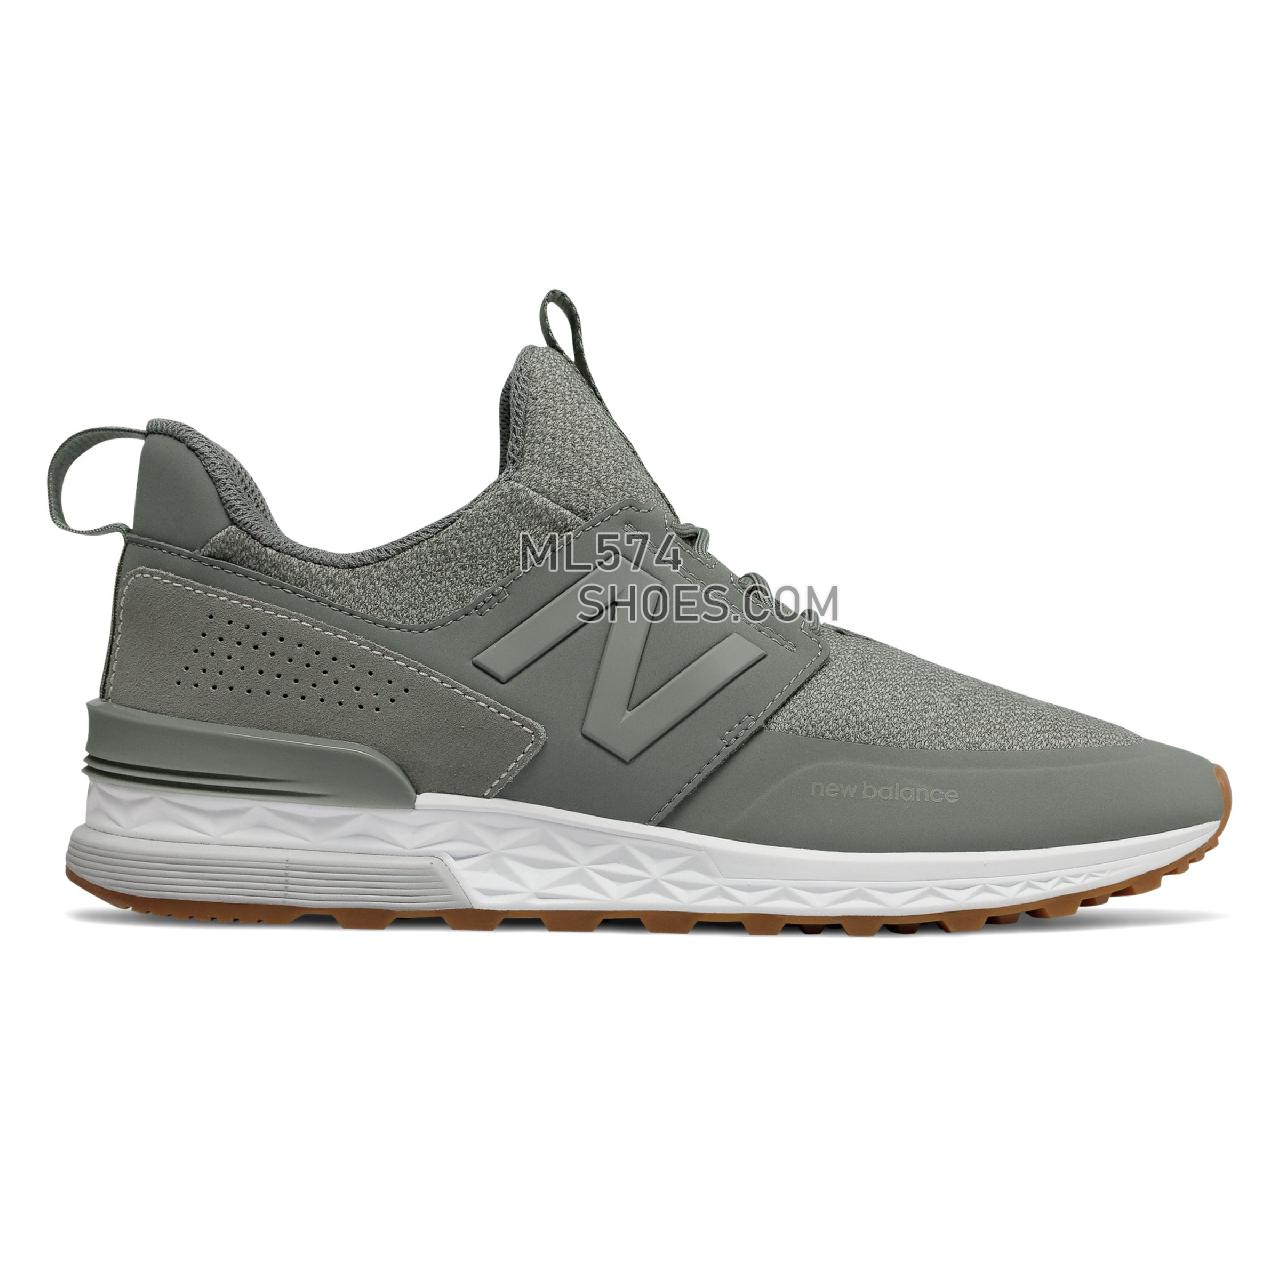 New Balance 574 Sport - Men's 574 - Classic Sedona Sage with Seed - MS574DTG